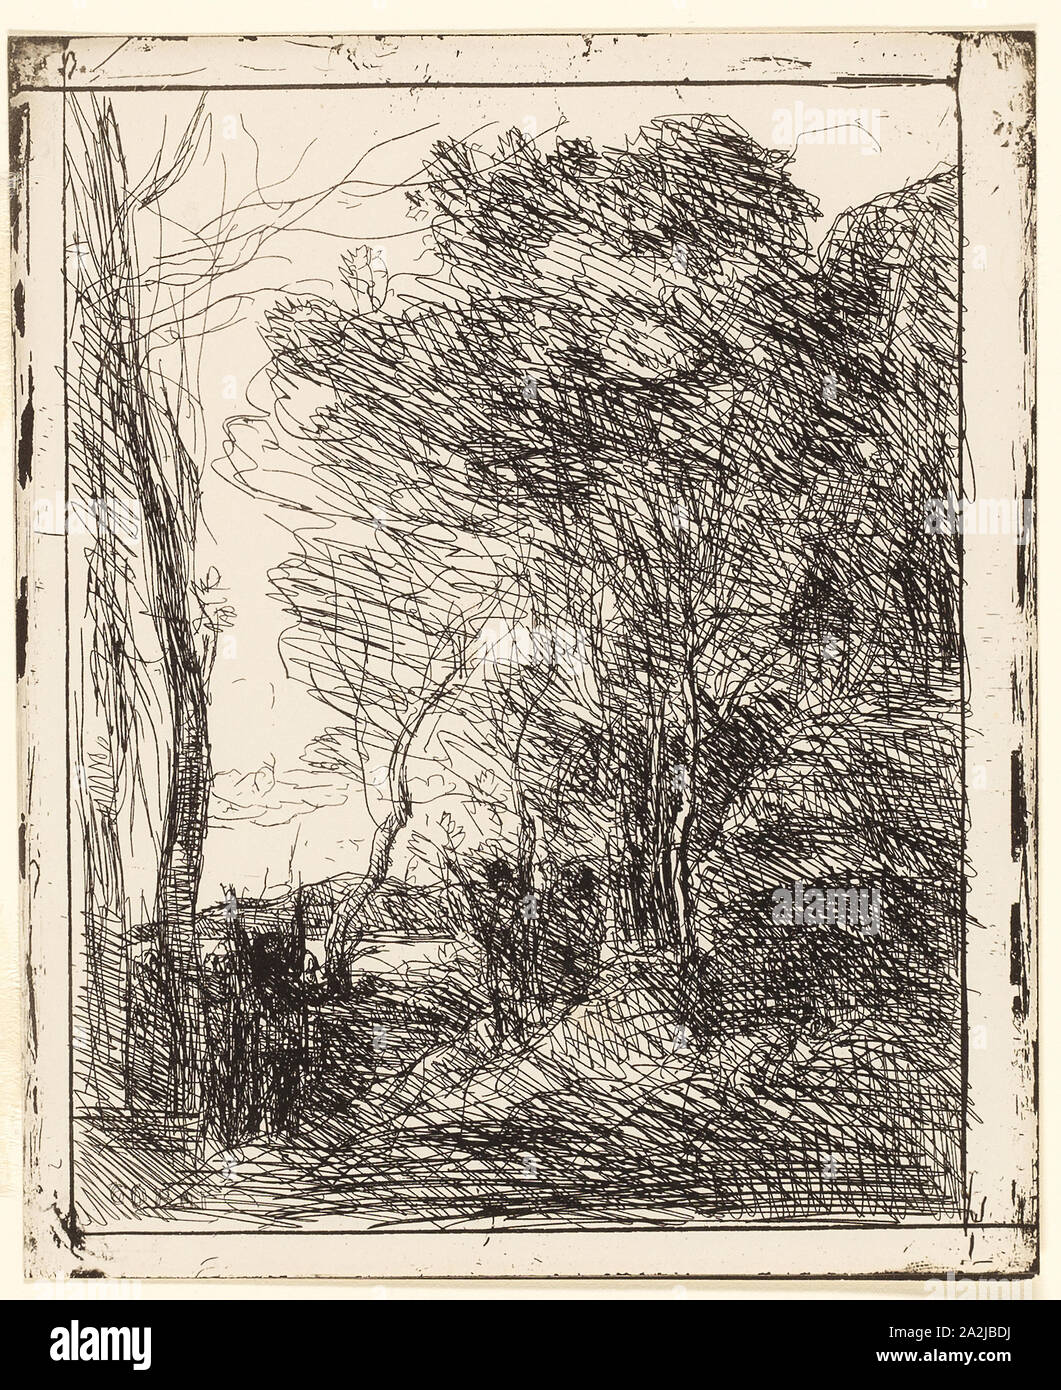 The Gallic Clearing, 1857, Jean-Baptiste-Camille Corot, French, 1796-1875, France, Cliché-verre on ivory photographic paper, 183 × 142 mm (image), 200 × 163 mm (sheet Stock Photo